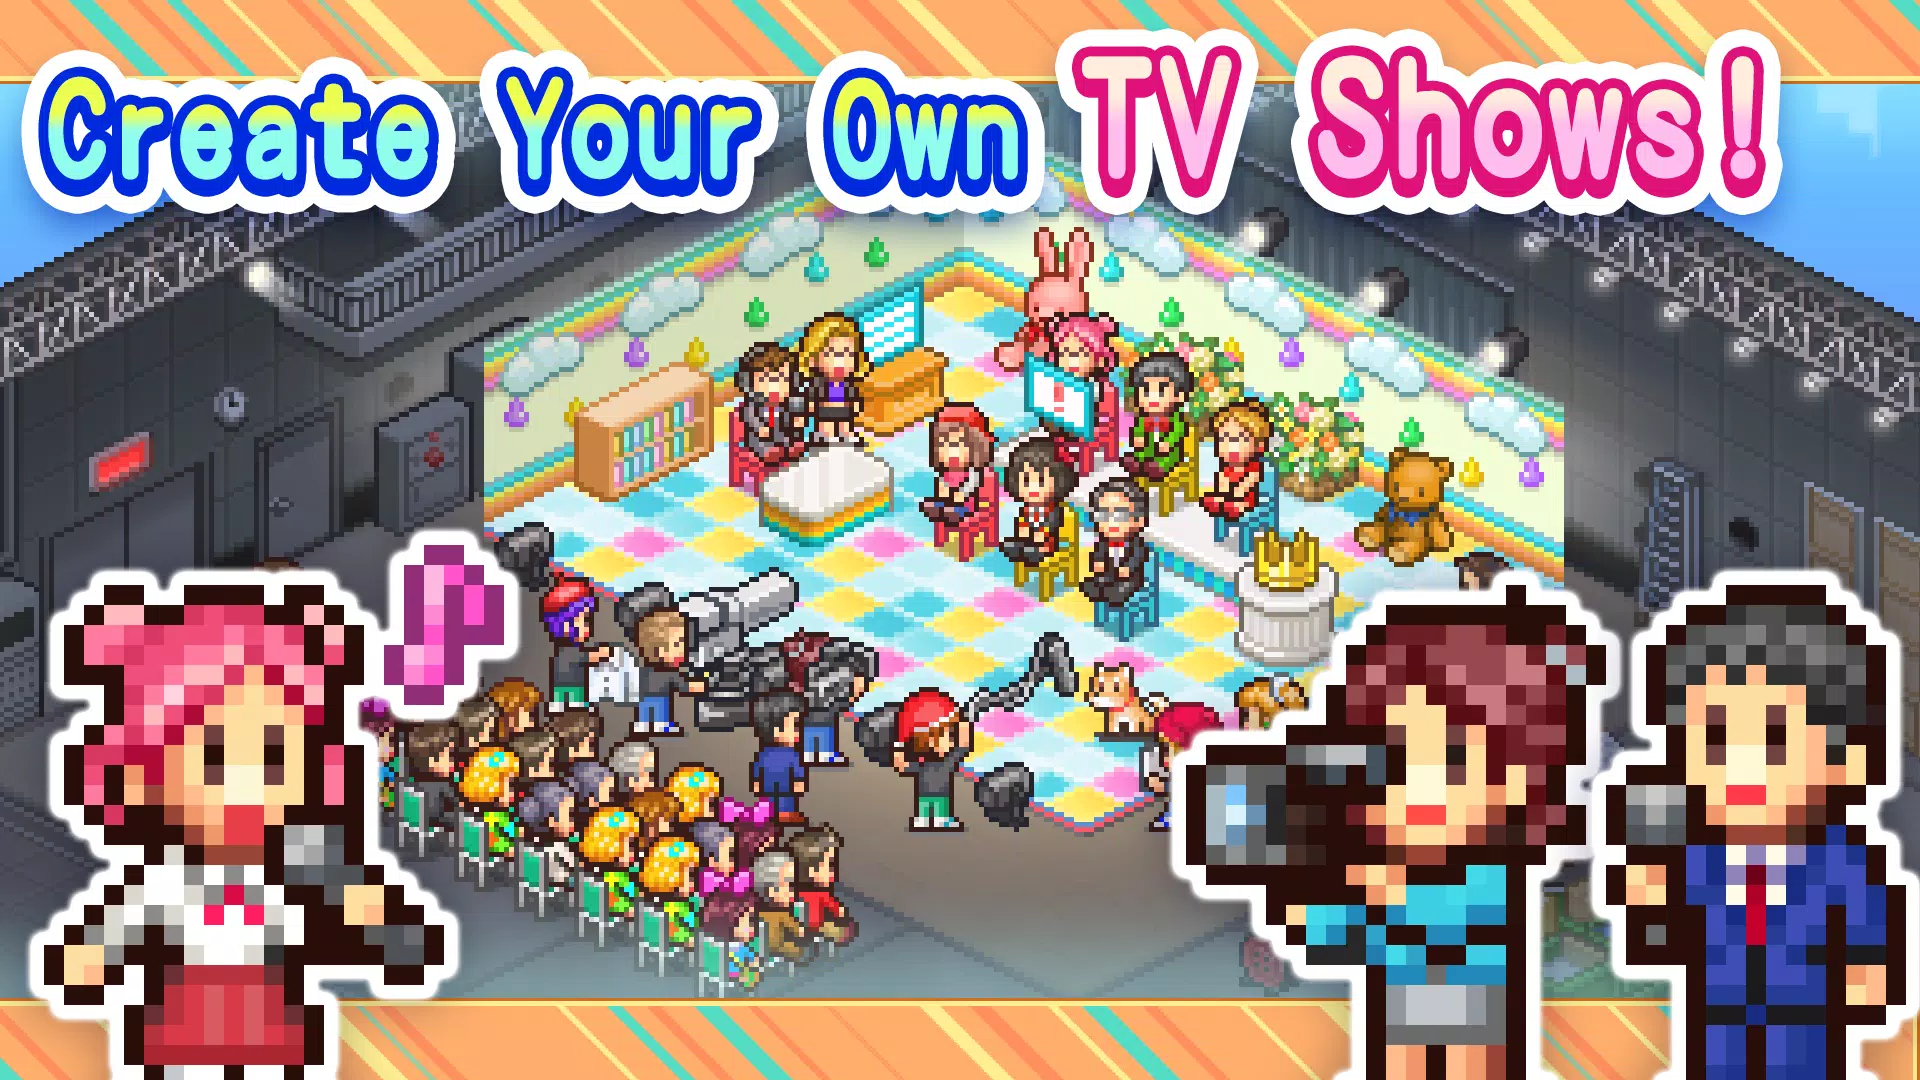 TV Studio Story Latest Version 115 for Android